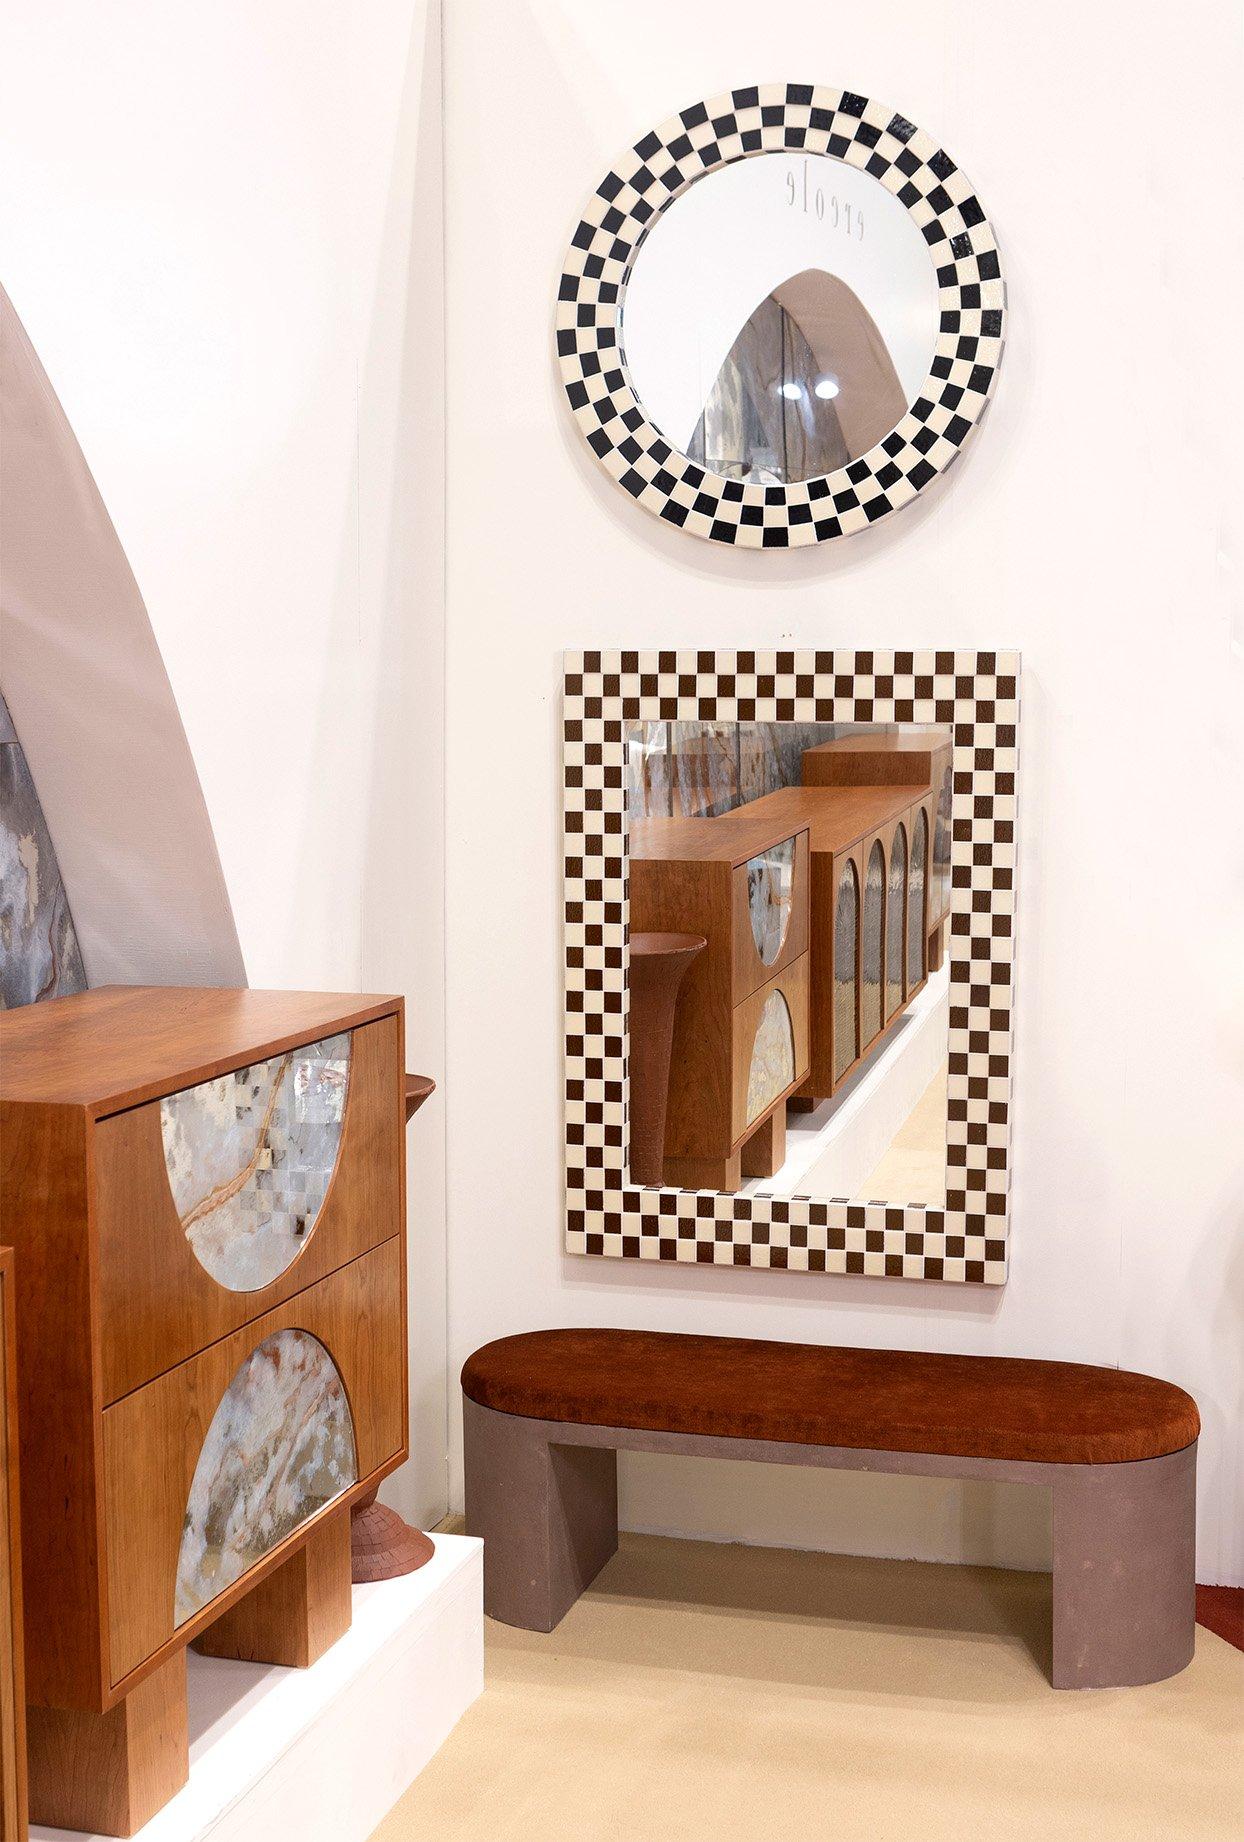 This bespoke modern circular mirror brings a casual, upbeat presence to your home. The checkered mosaic is a mixture of black and ivory glass in layered steps. The border around the mirror is 4